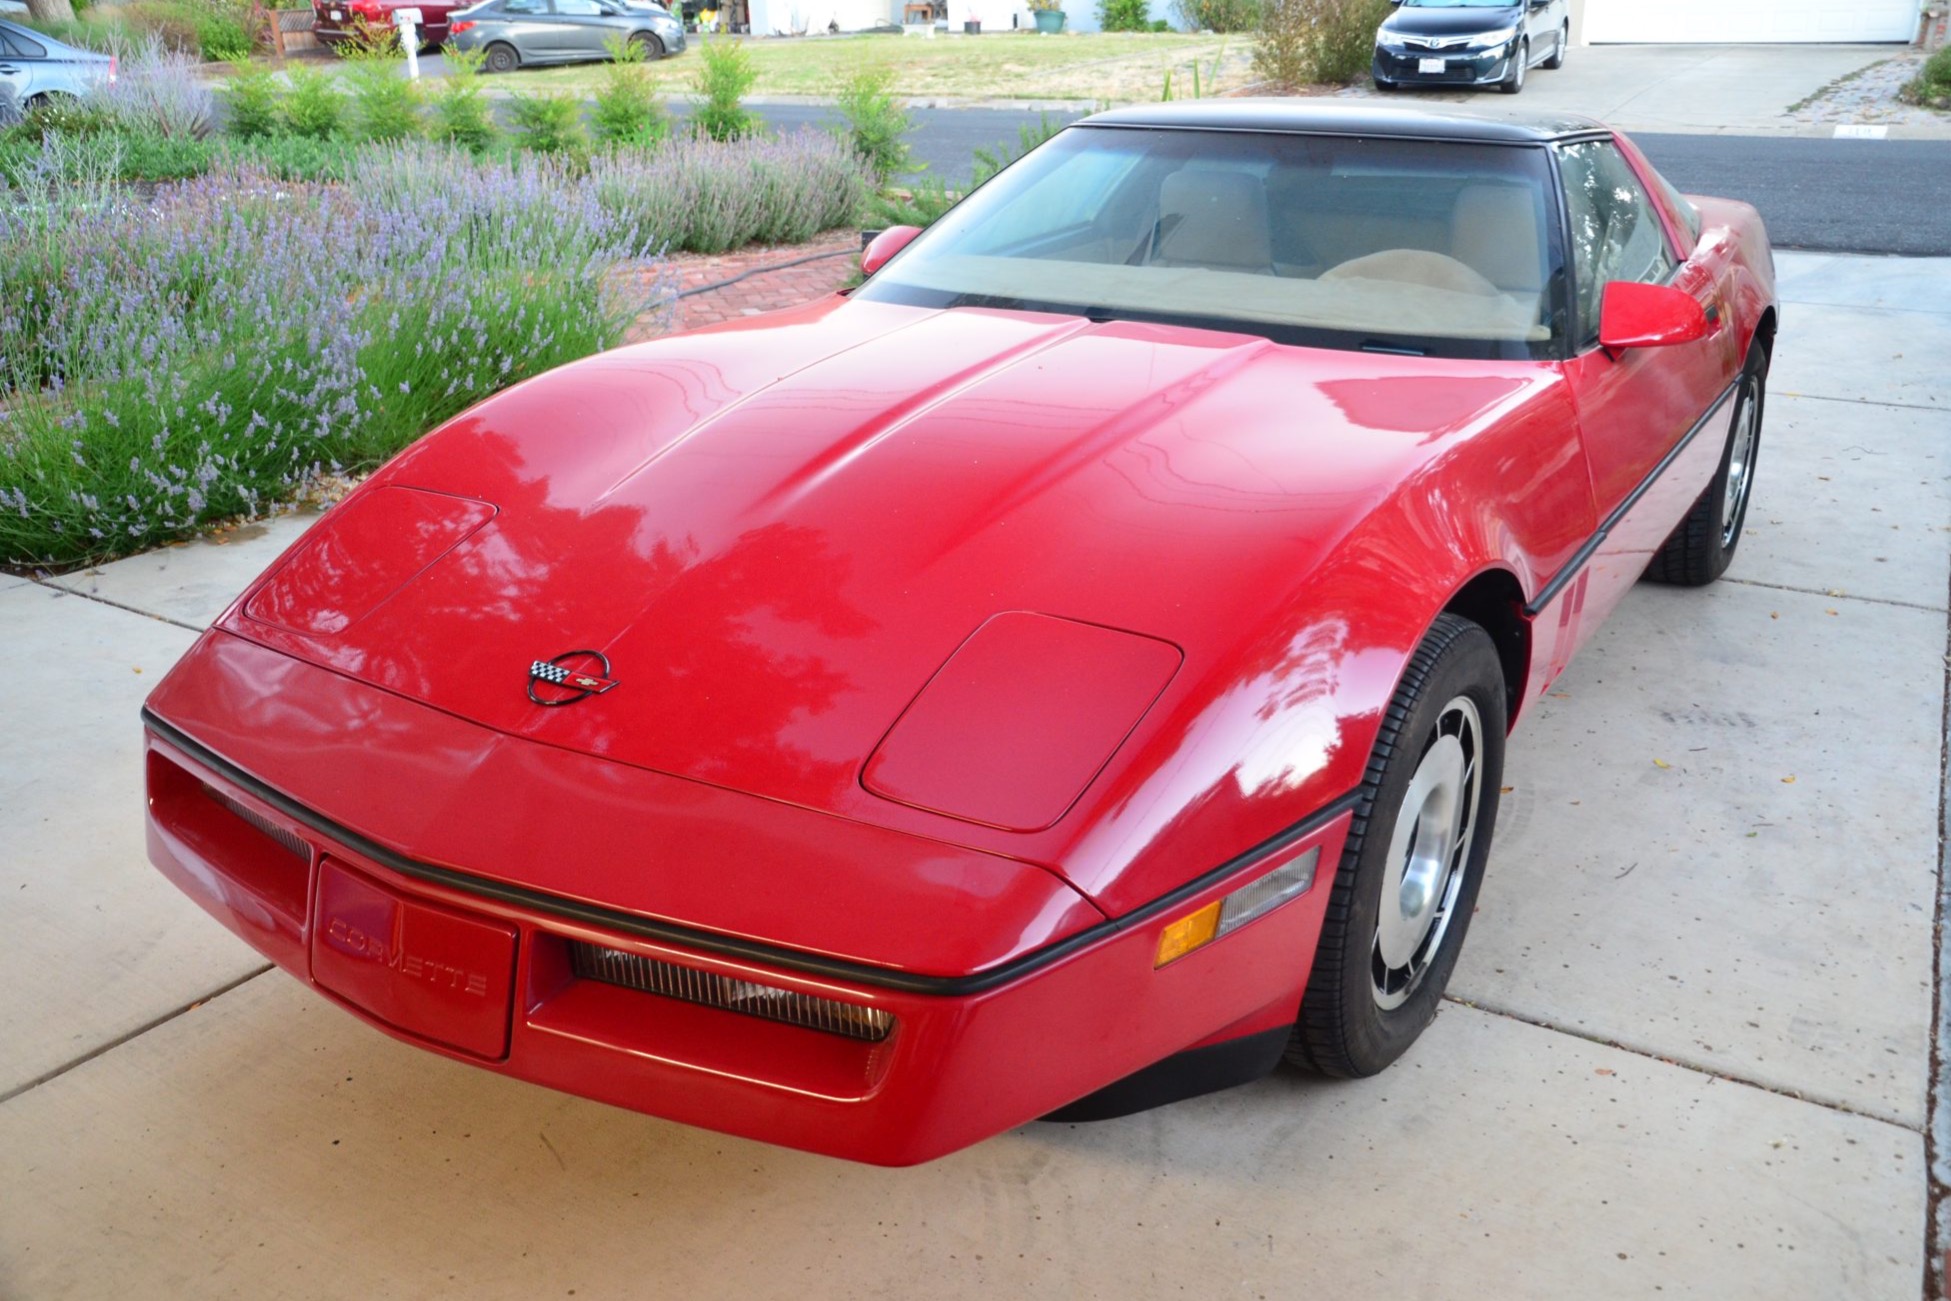 Used Original-Owner 1984 Chevrolet Corvette Coupe Z51 4-Speed Project Review